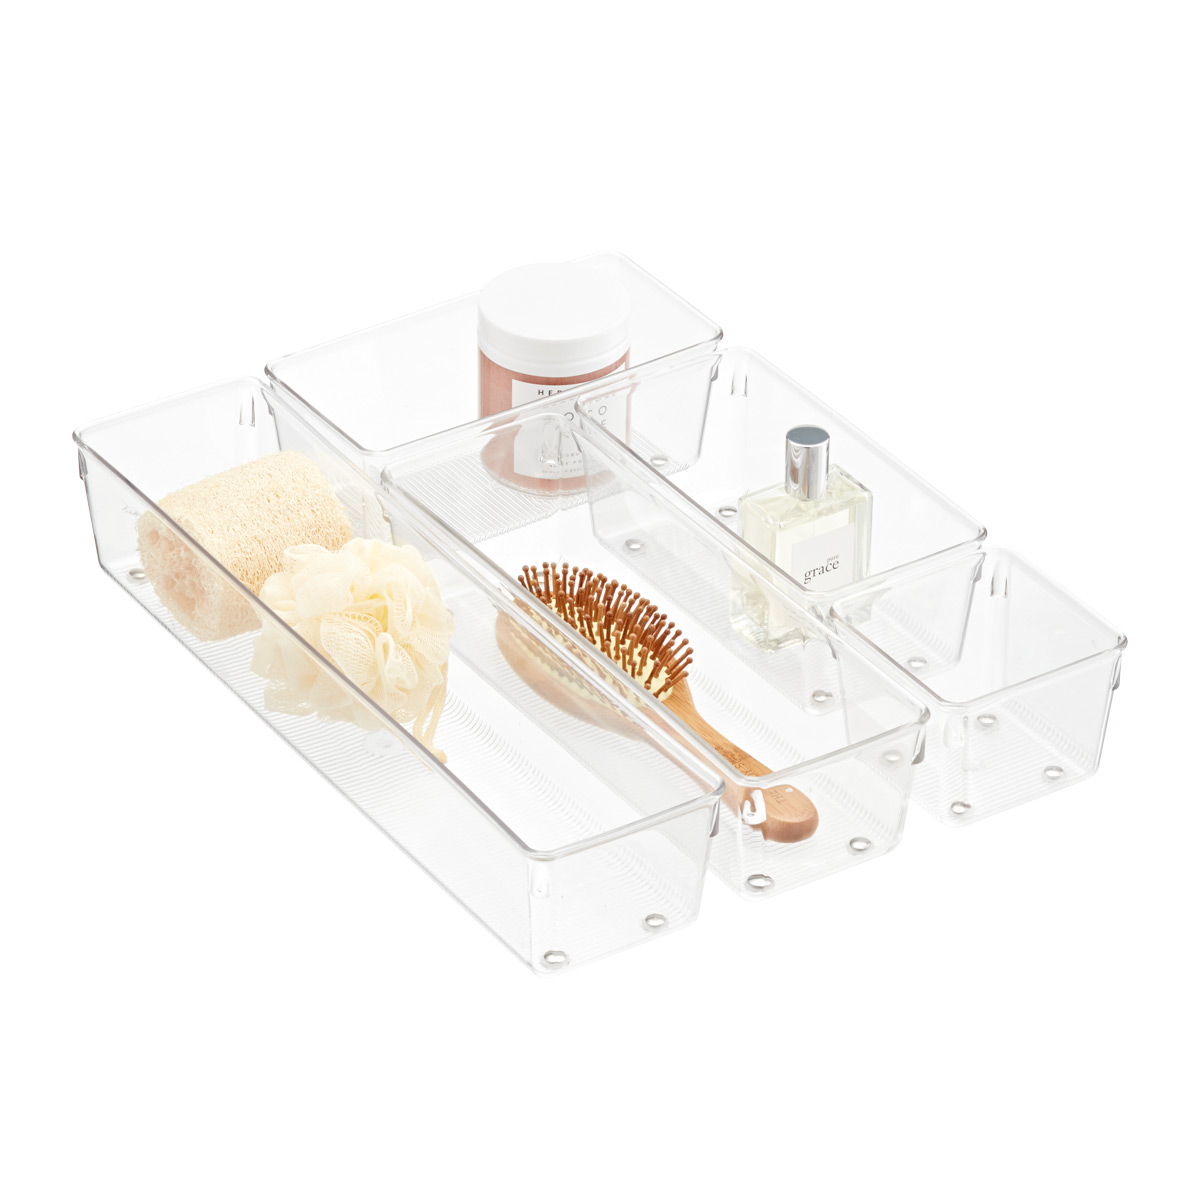 https://www.containerstore.com/catalogimages/313997/10029071g-linus-deep-drawer-organize.jpg